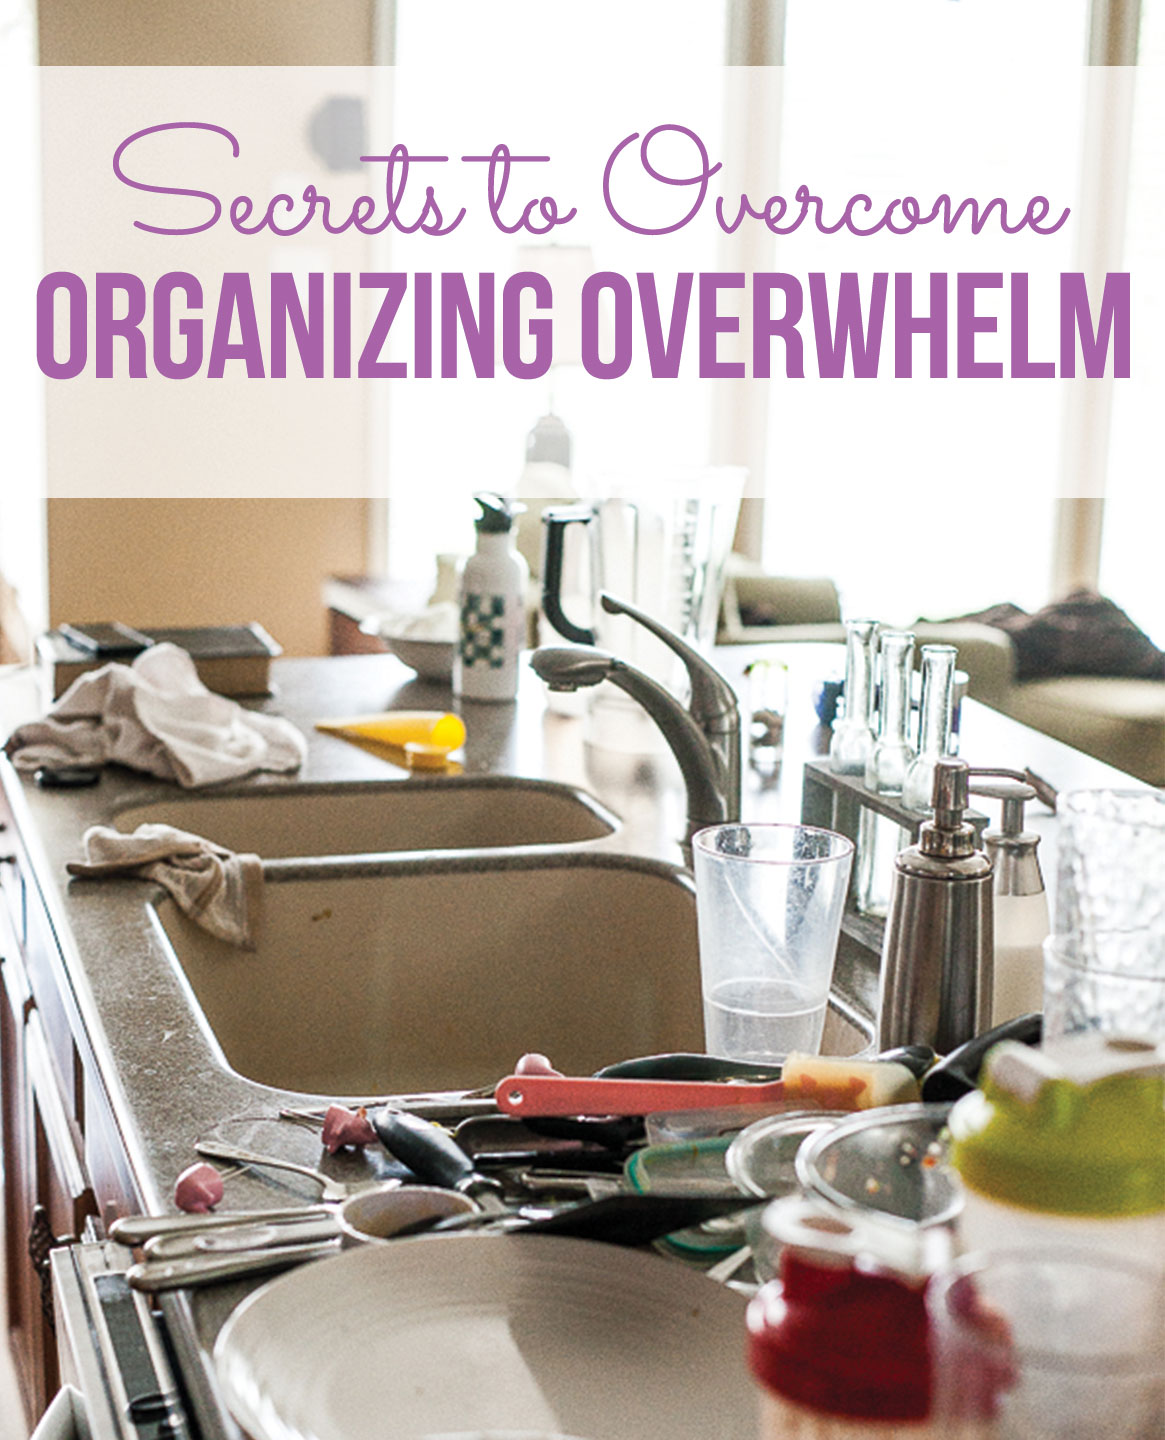 Secrets to overcoming organizing overwhelm PLUS a free project tracker printable.